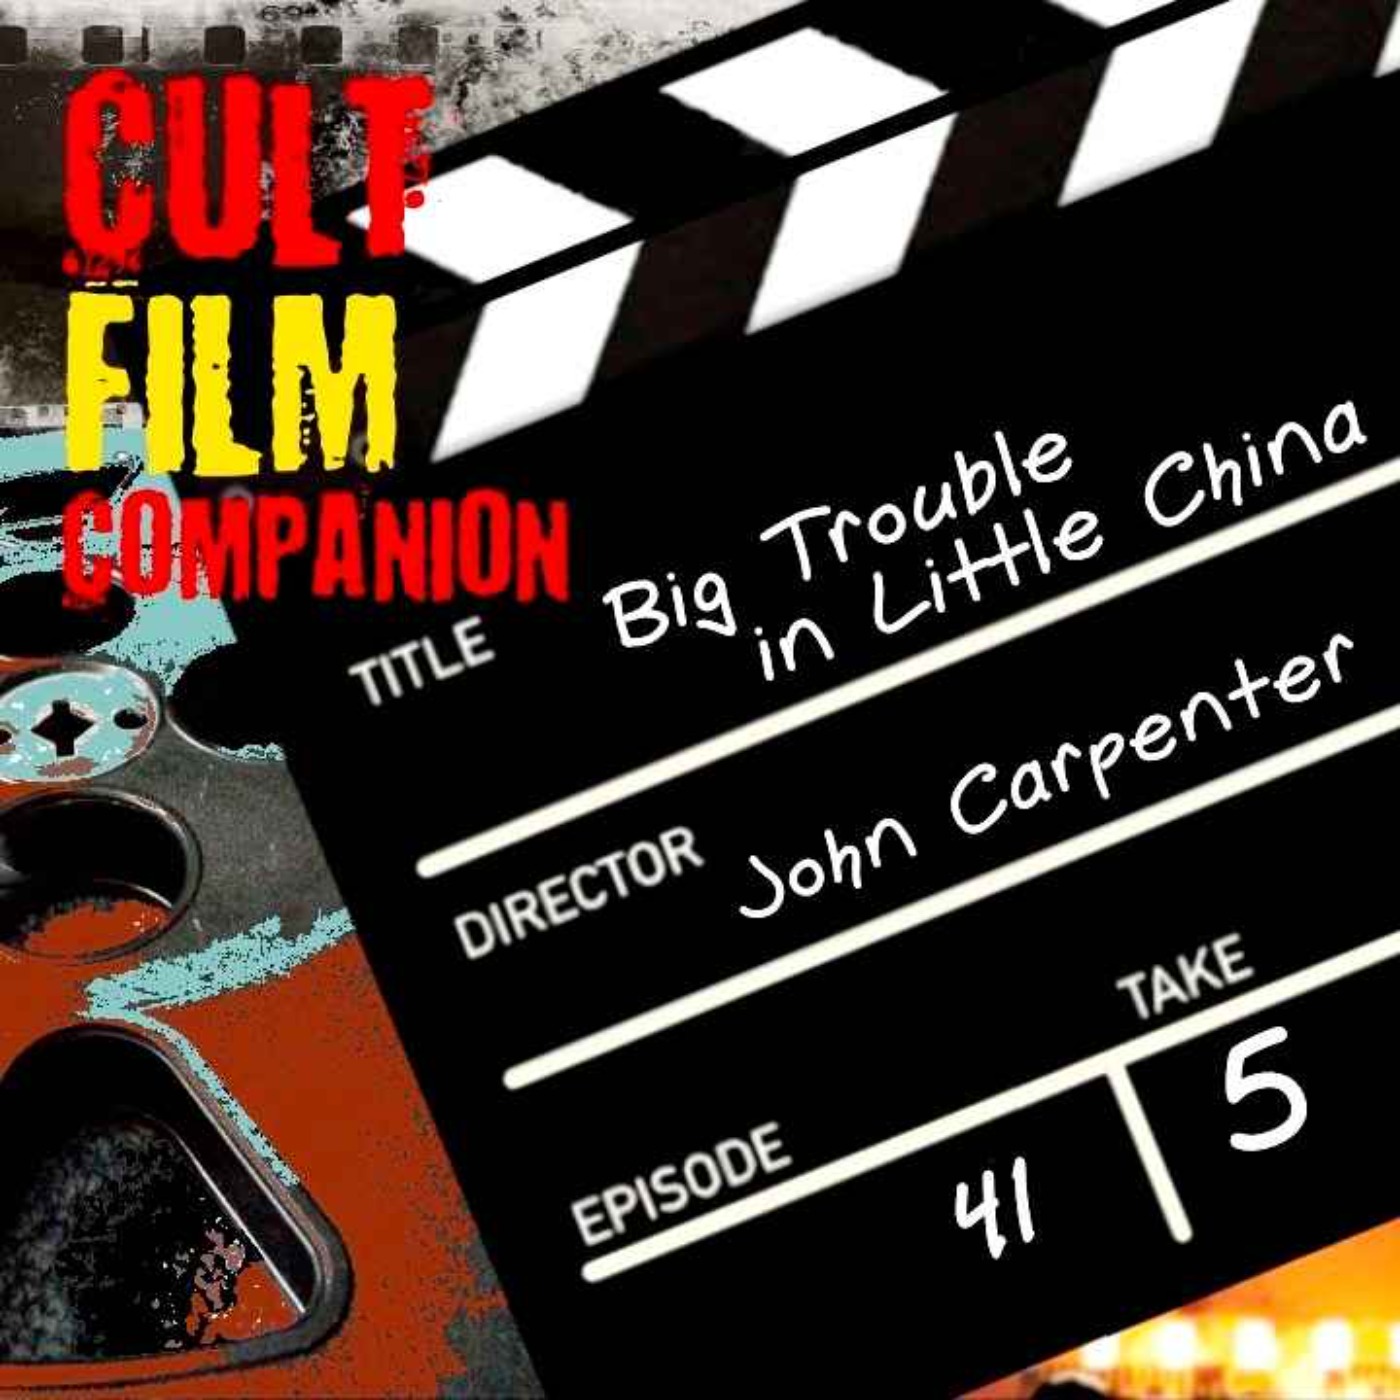 Ep. 41 Big Trouble in Little China directed by John Carpenter